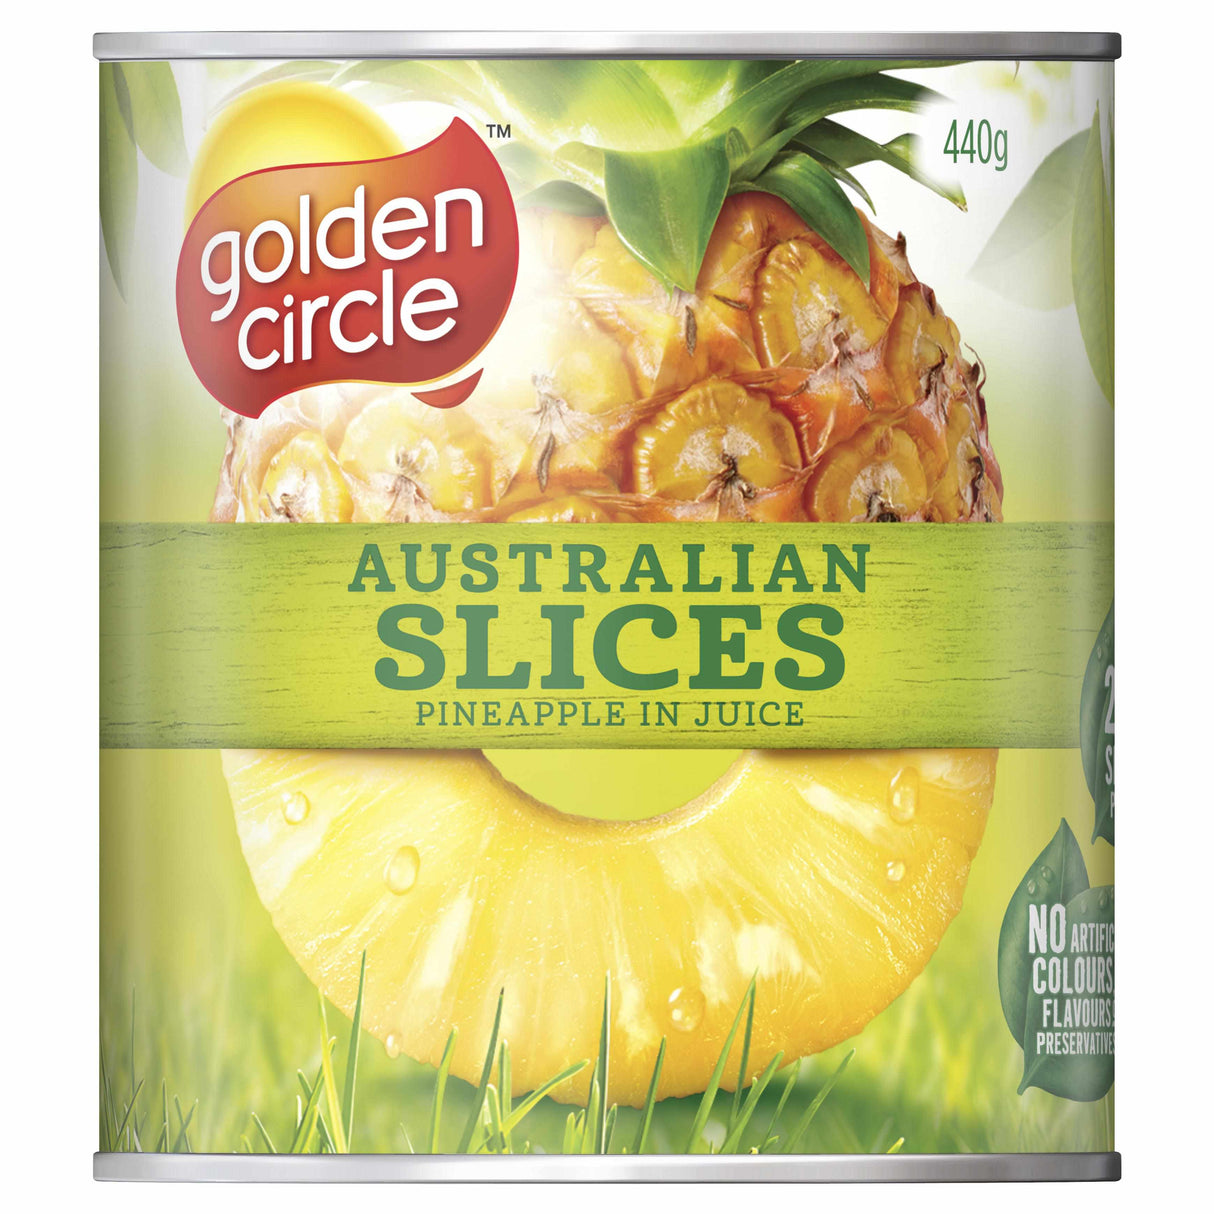 Golden Circle Pineapple Slices in Juice 440g